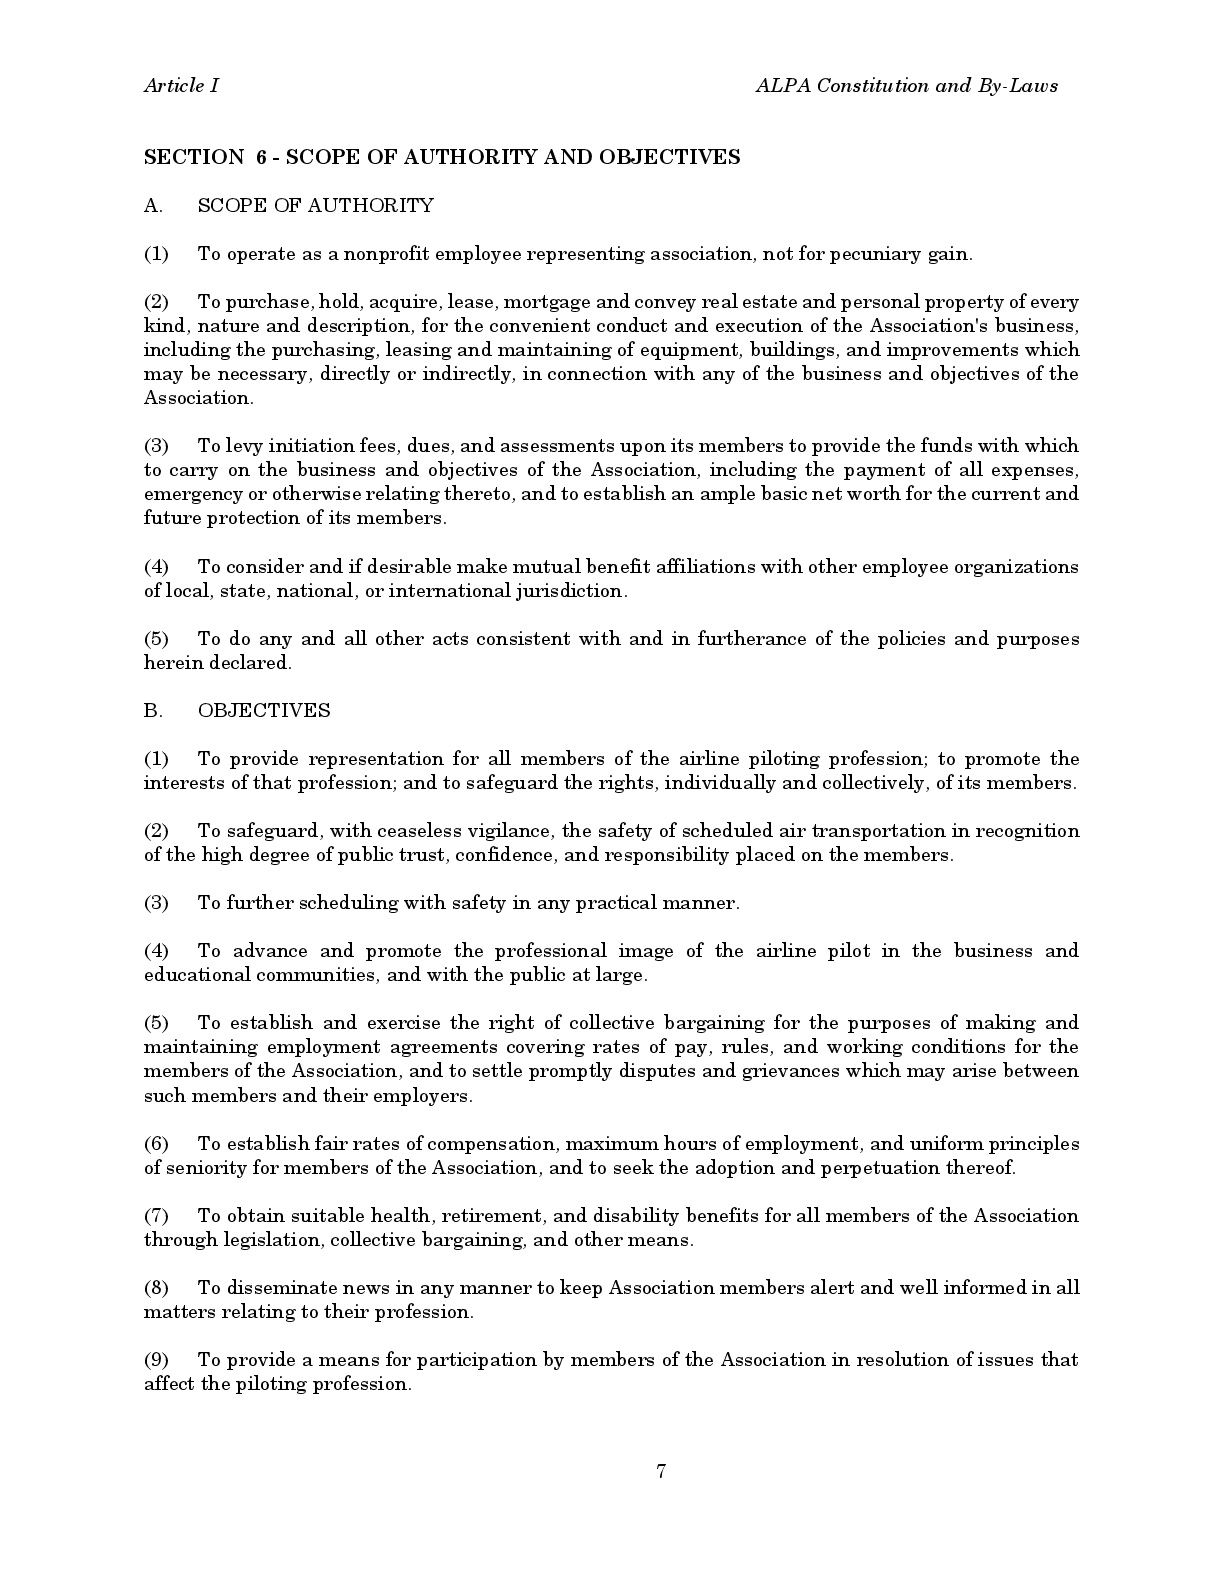 ALPA_Constitution_and_Bylaws_page_7_JPG.jpg